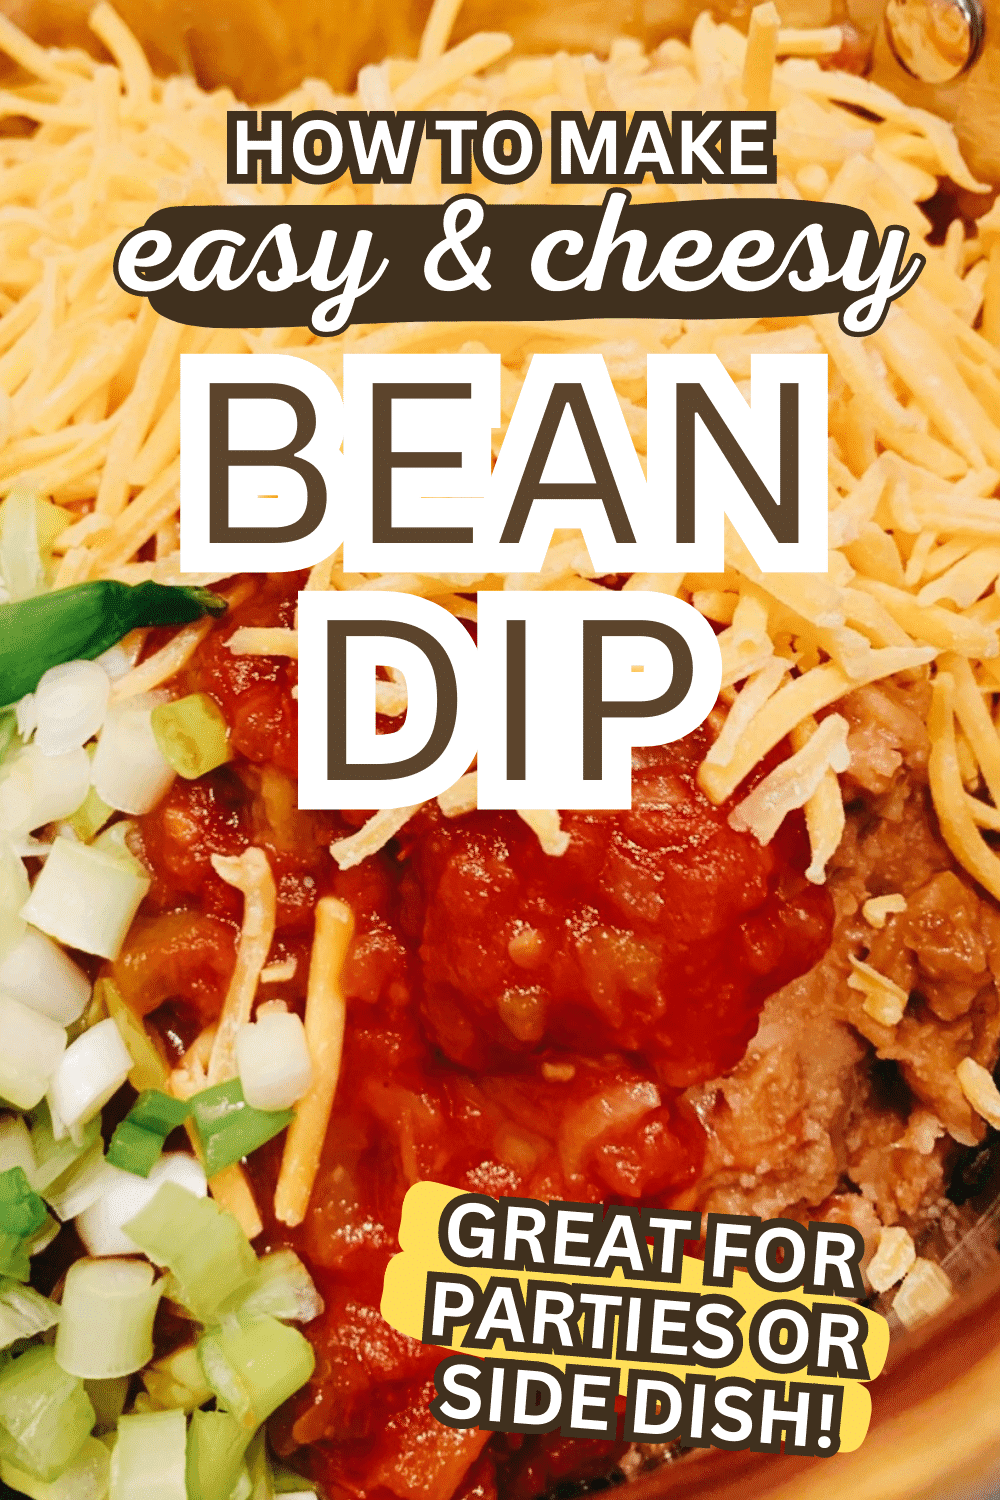 Easy Cheesy Refried Bean Dip Recipe text over image of refried beans ingredients